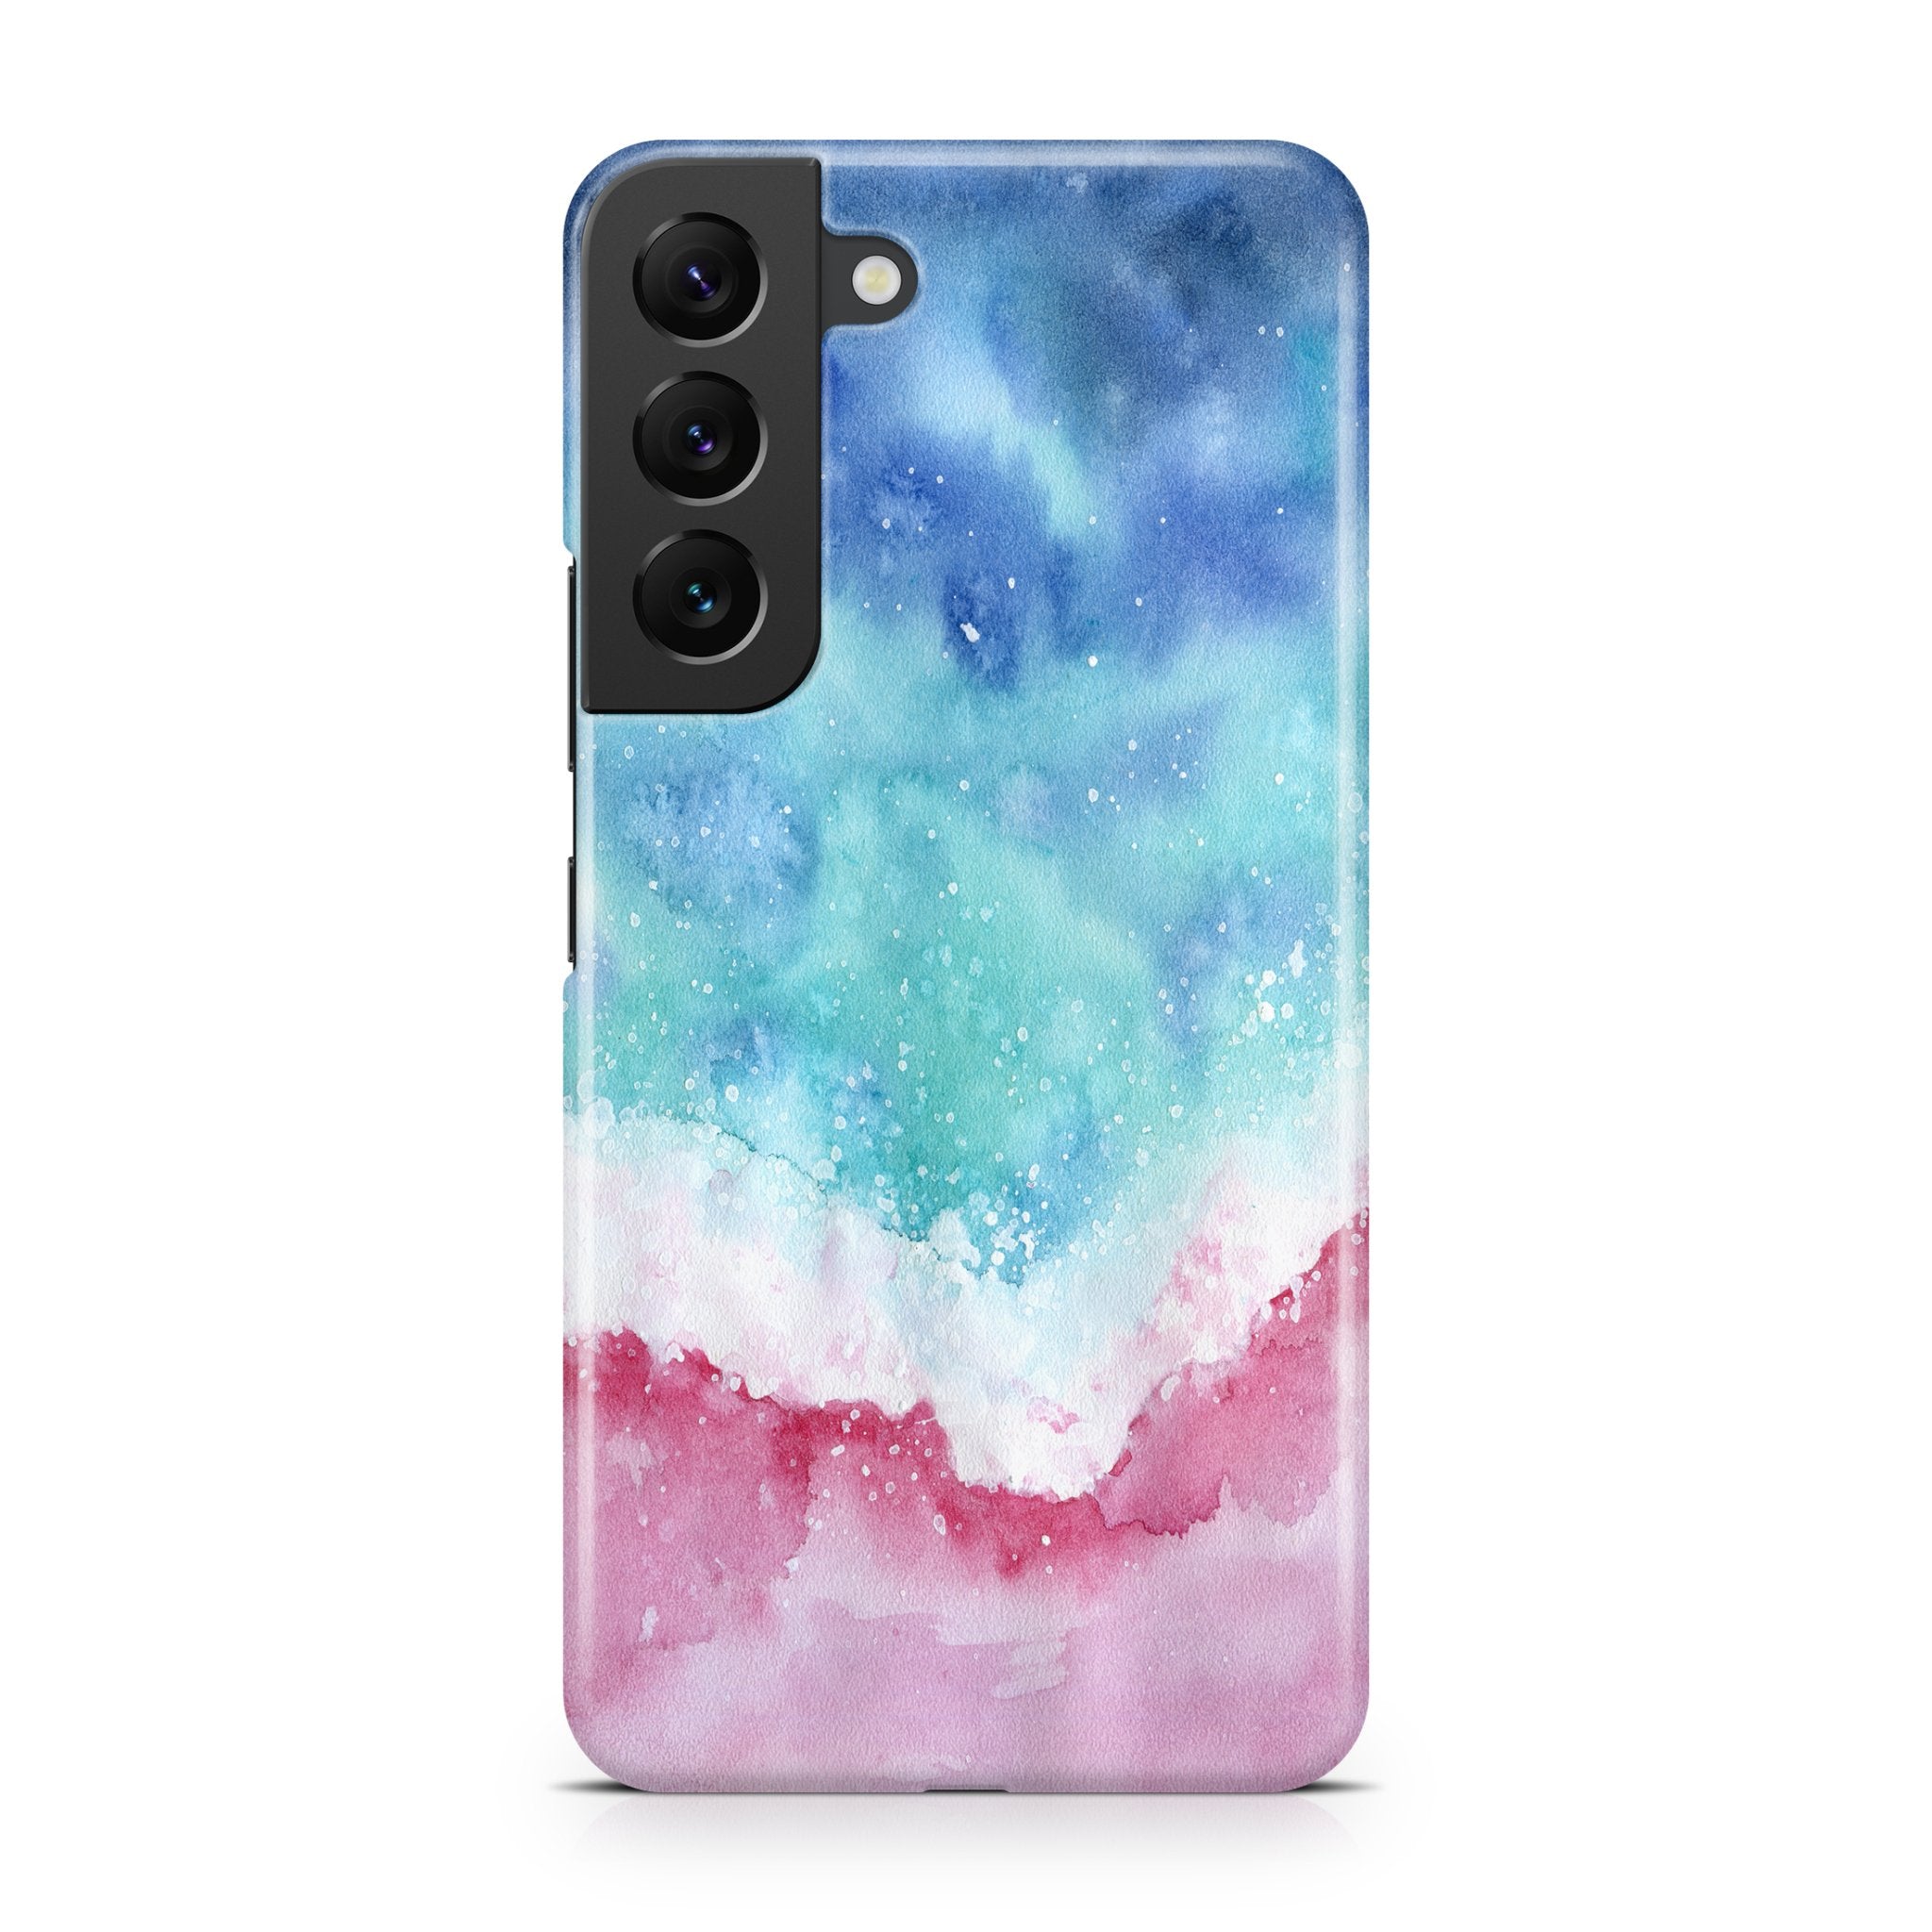 WaterColor Beach - Samsung phone case designs by CaseSwagger